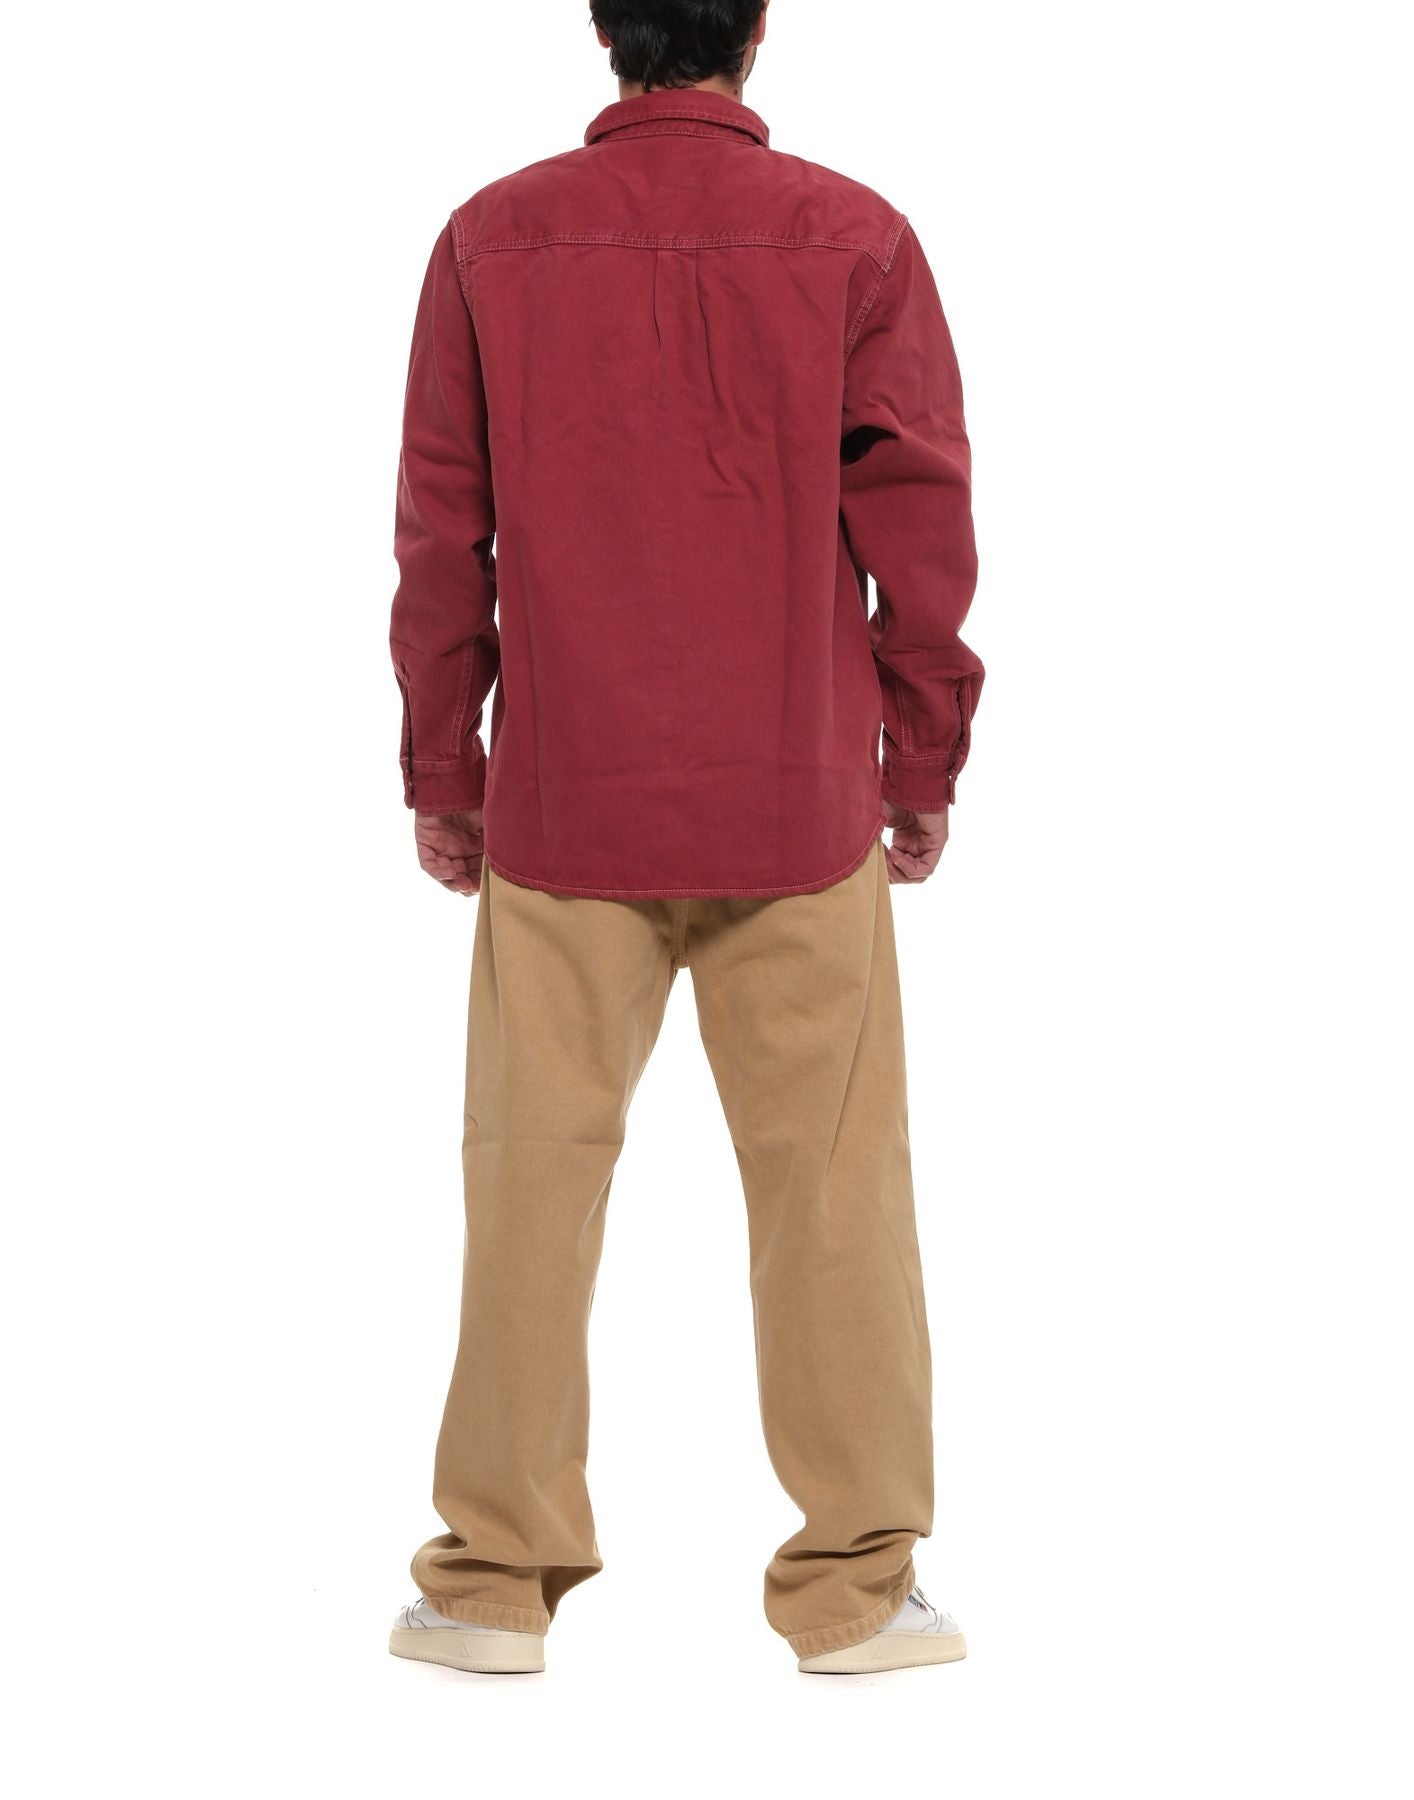 Veste pour homme I033750 0024J TUSCANY STONE DYED CARHARTT WIP